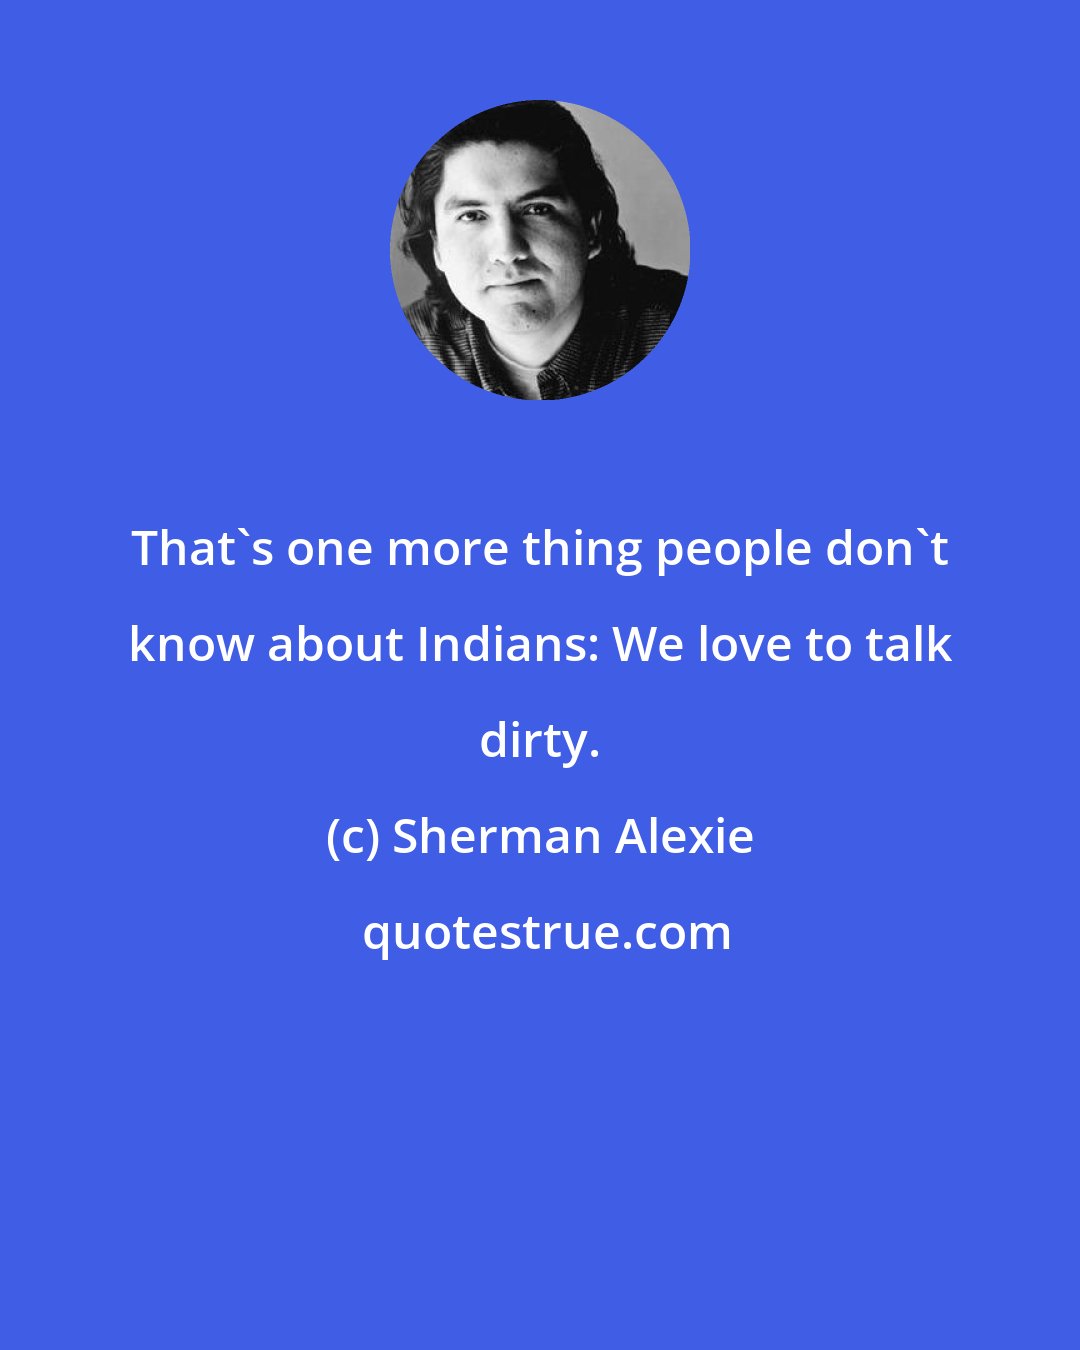 Sherman Alexie: That's one more thing people don't know about Indians: We love to talk dirty.